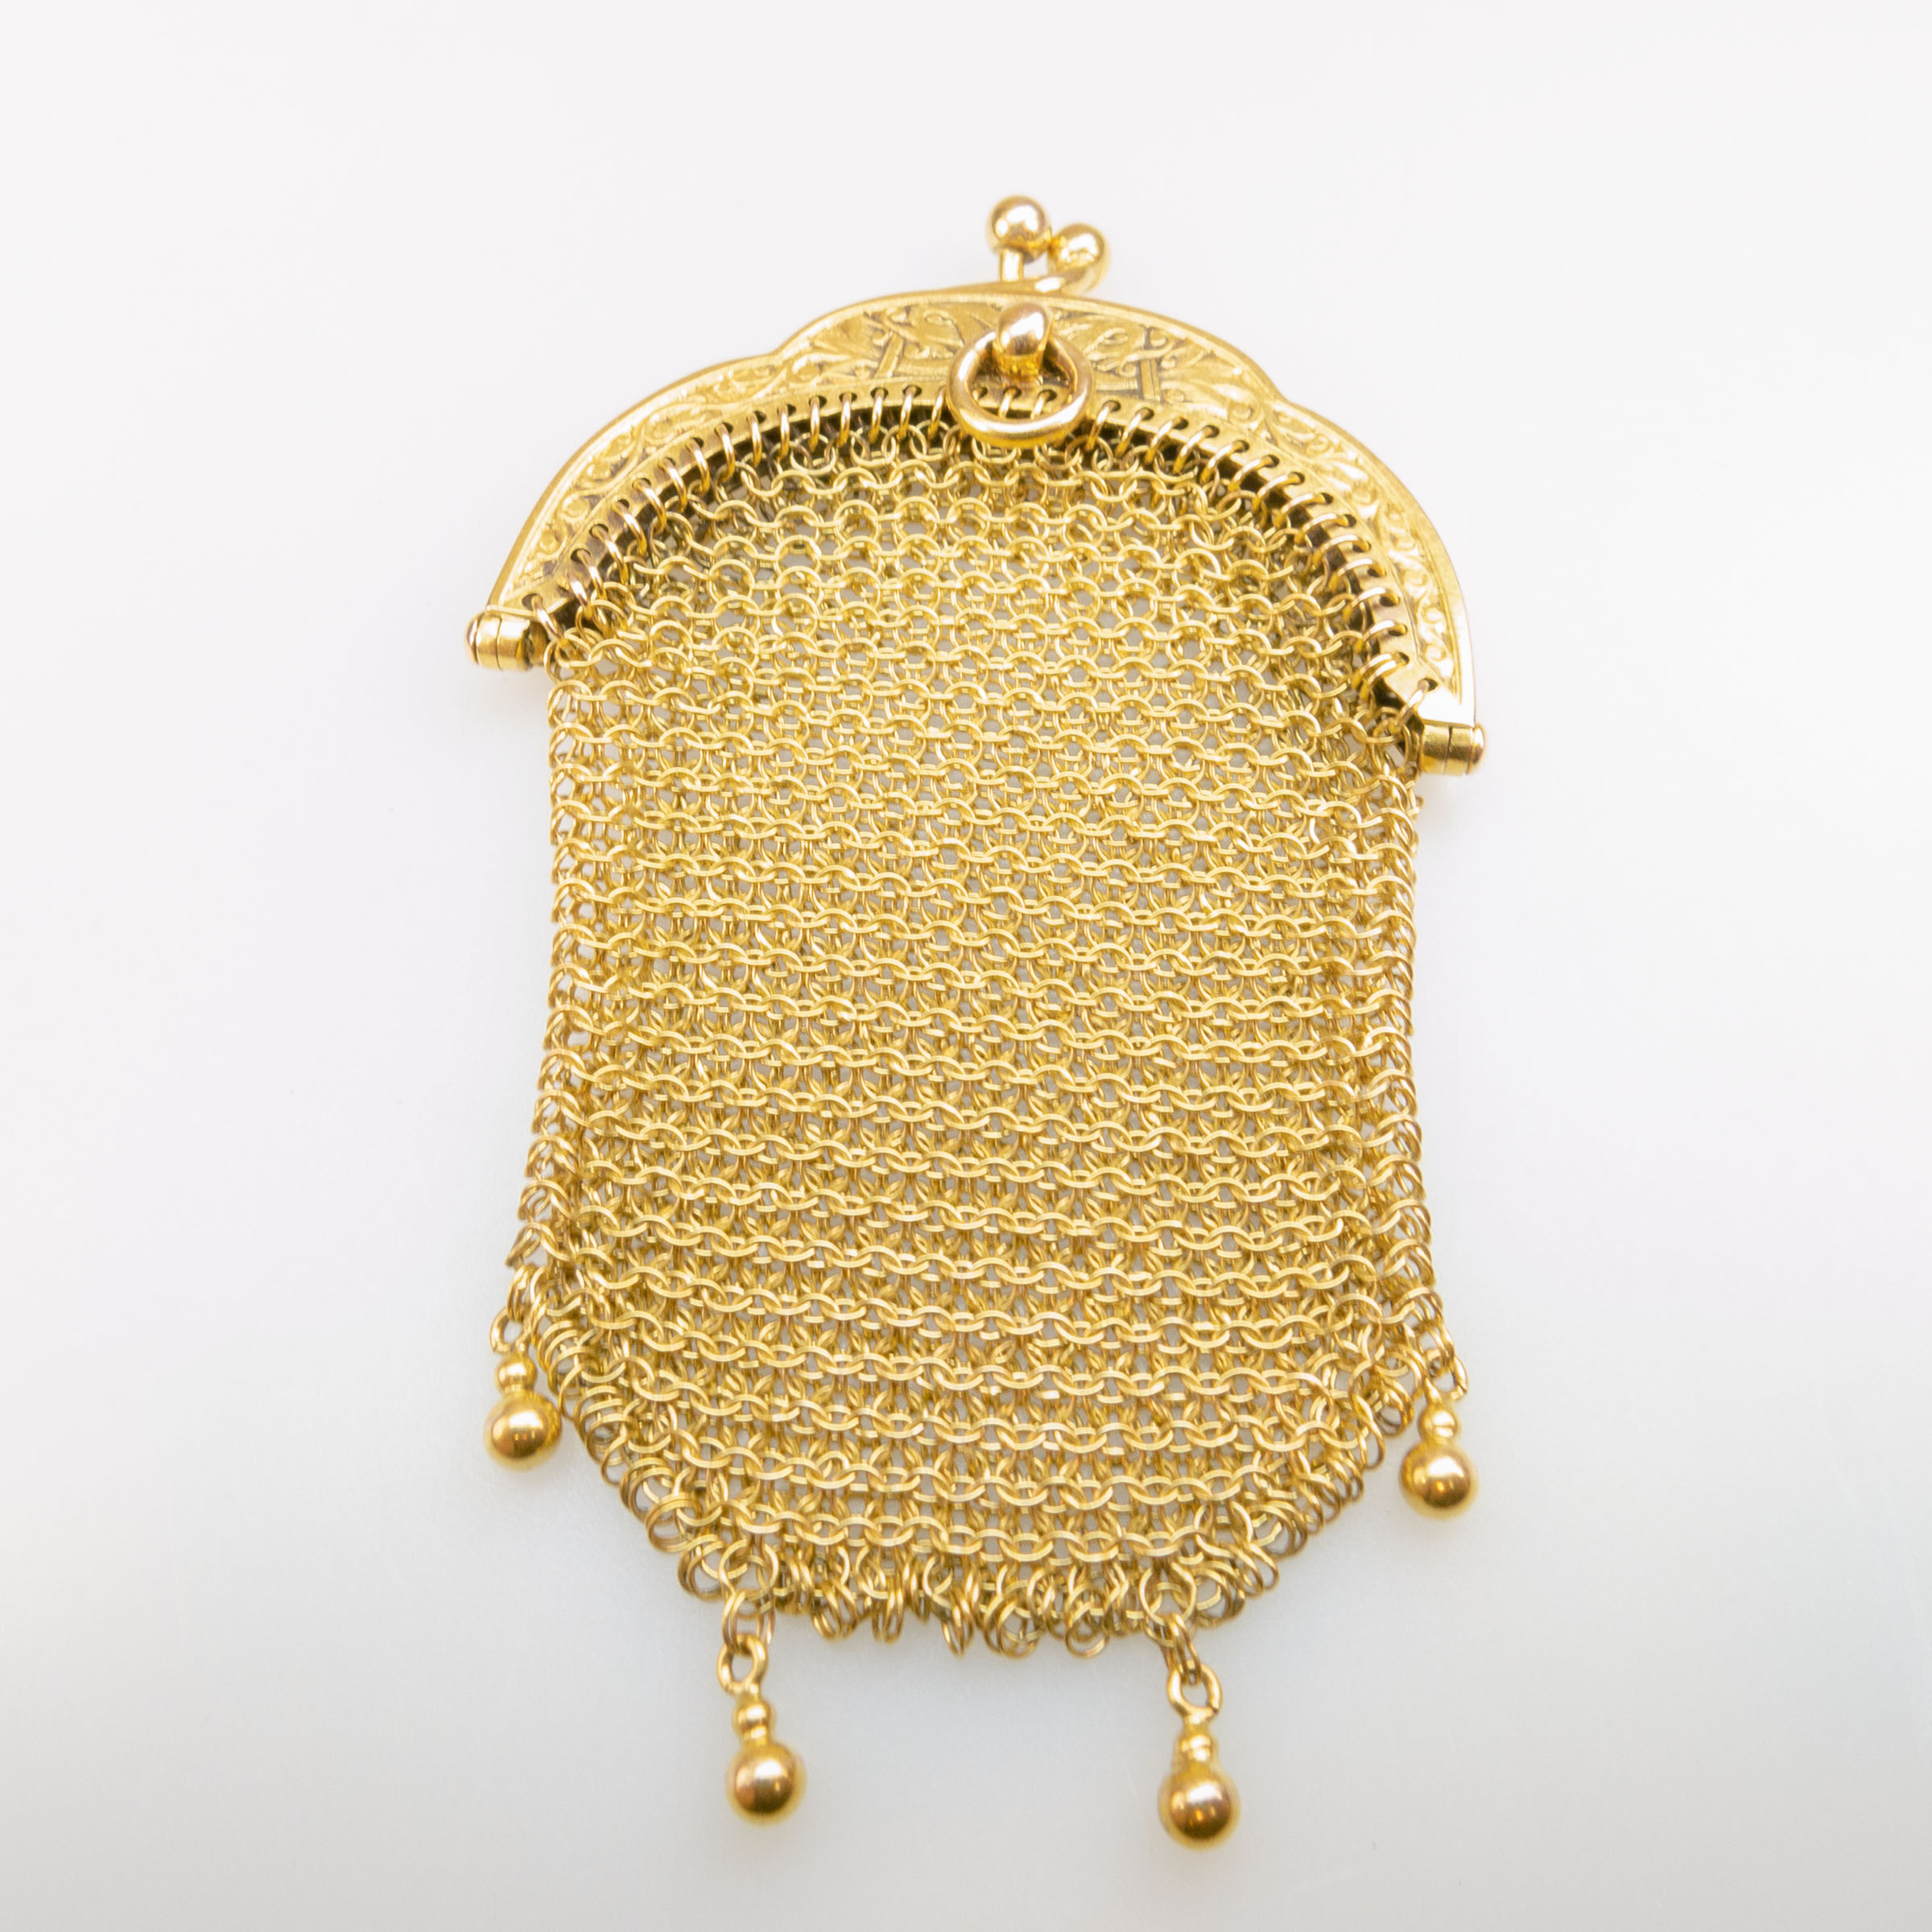 French 18k Yellow Gold Mesh Coin Purse